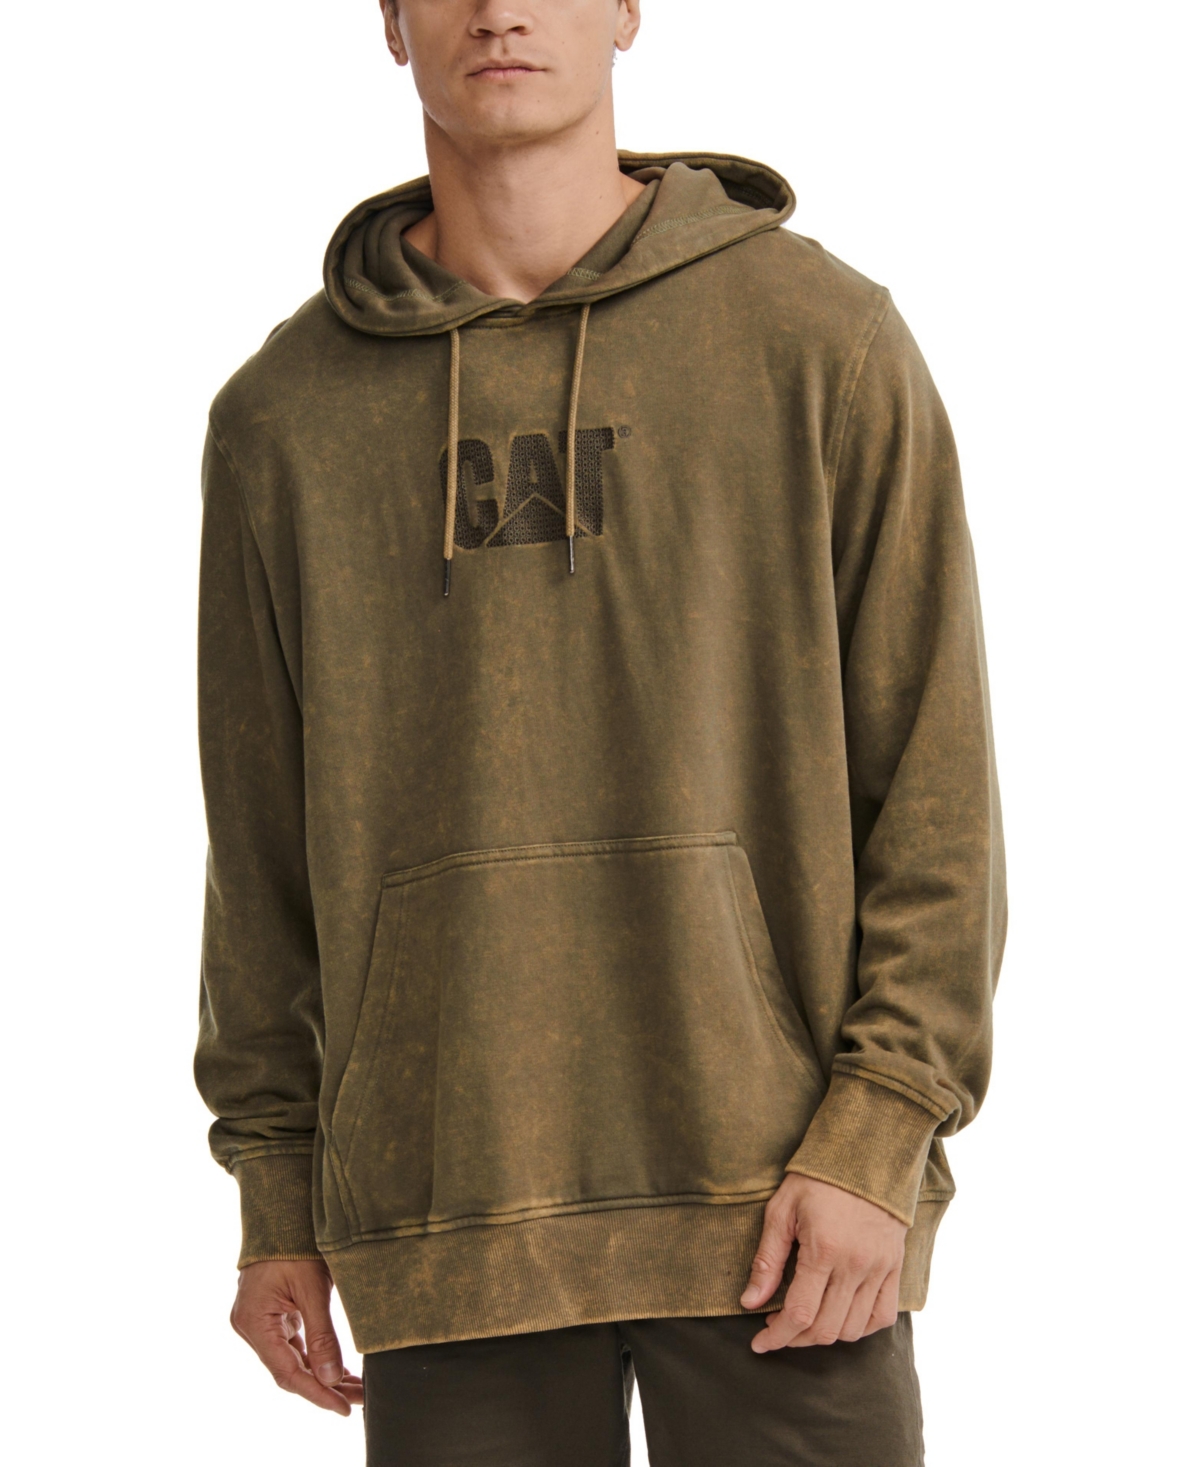 Men's Heritage Uniform Embroidered Hoodie - Dusty Olive